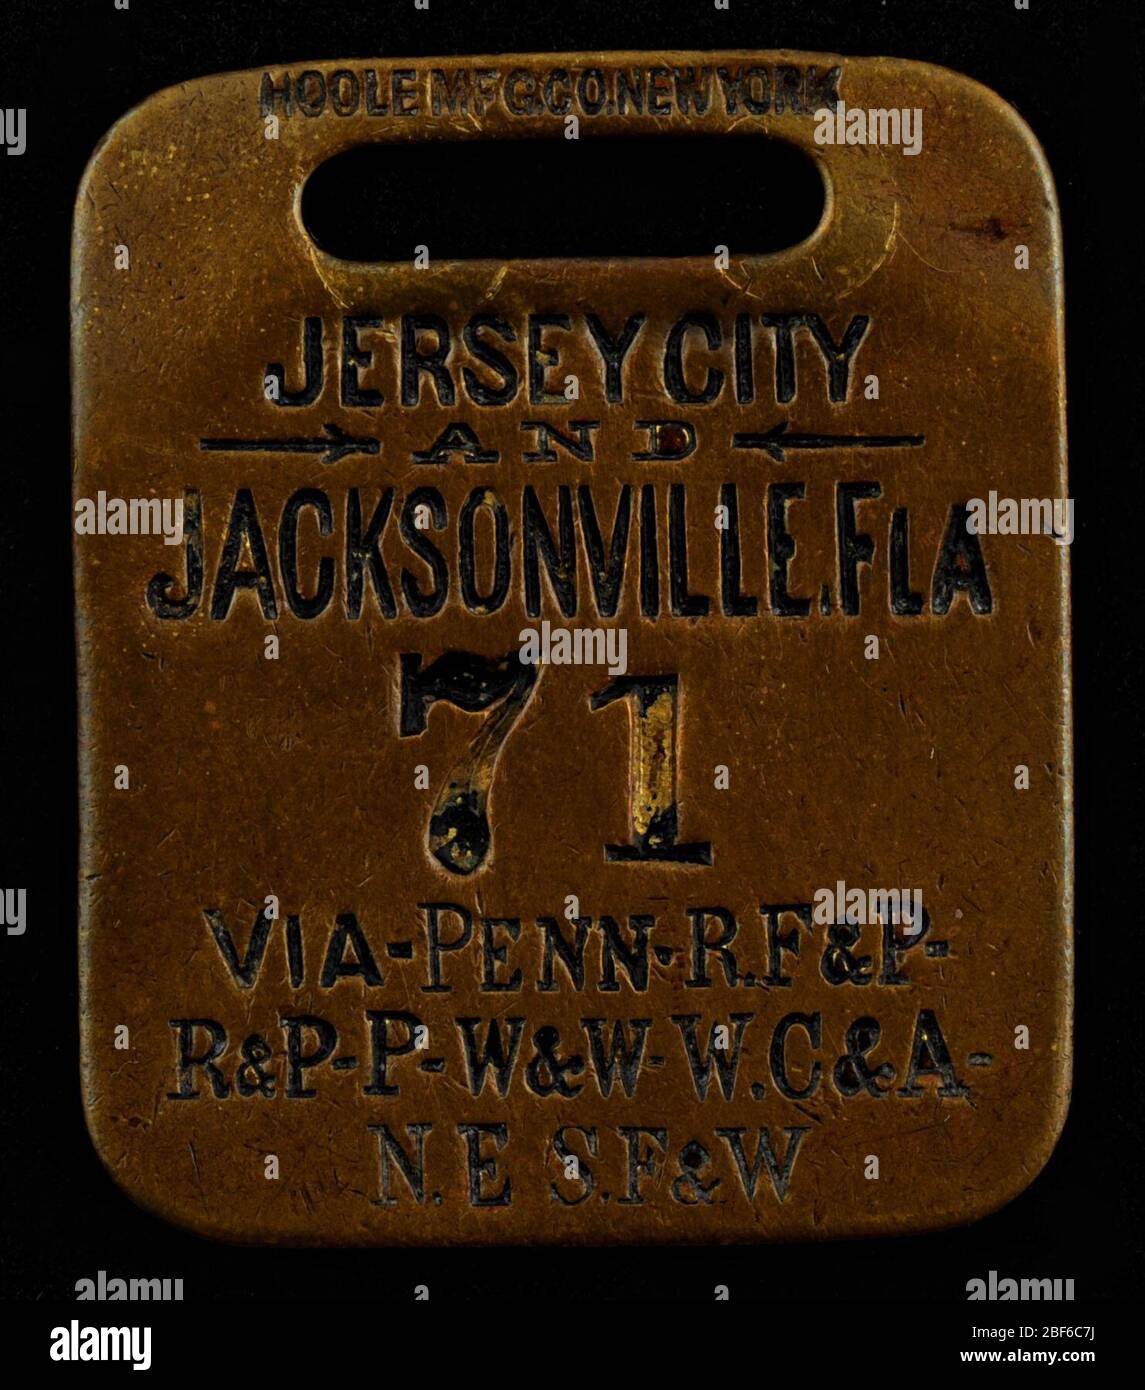 Eastern Seaboard Trip Owney tag. This tag marks Owney’s travels on a series of small railway lines between Jersey City, New Jersey, to Jacksonville, Florida. Among the lines Owney traveled were the Pennsylvania and the Richmond, Fredericksburg and Potomac Railroad. Stock Photo